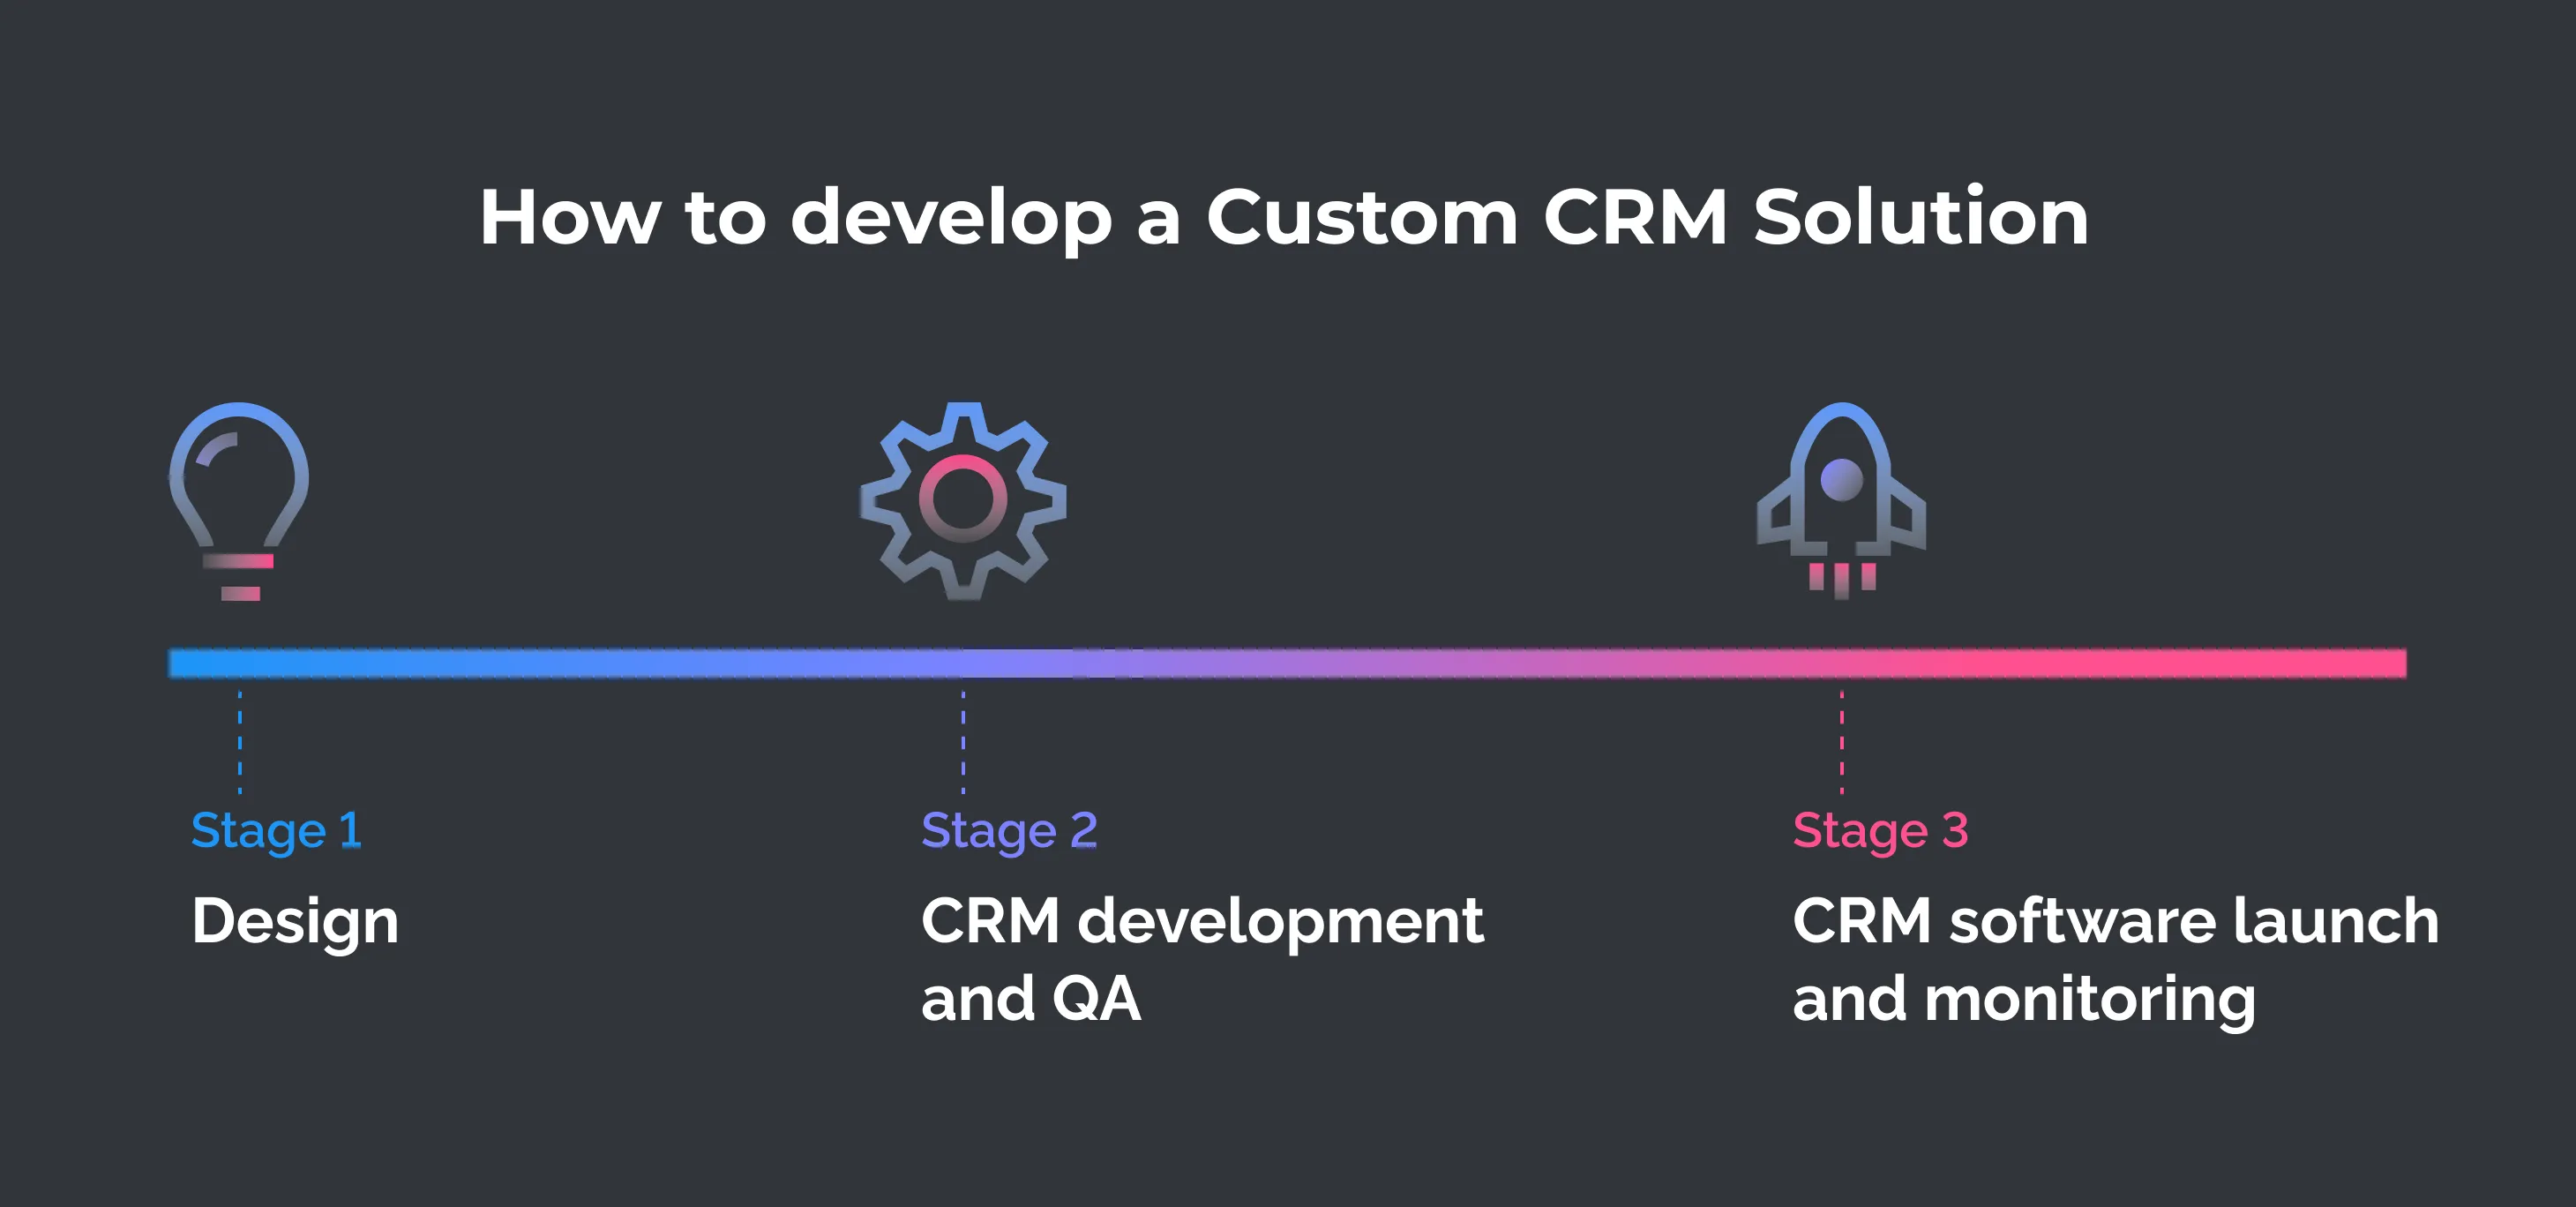 How to Develop a Custom CRM Solution